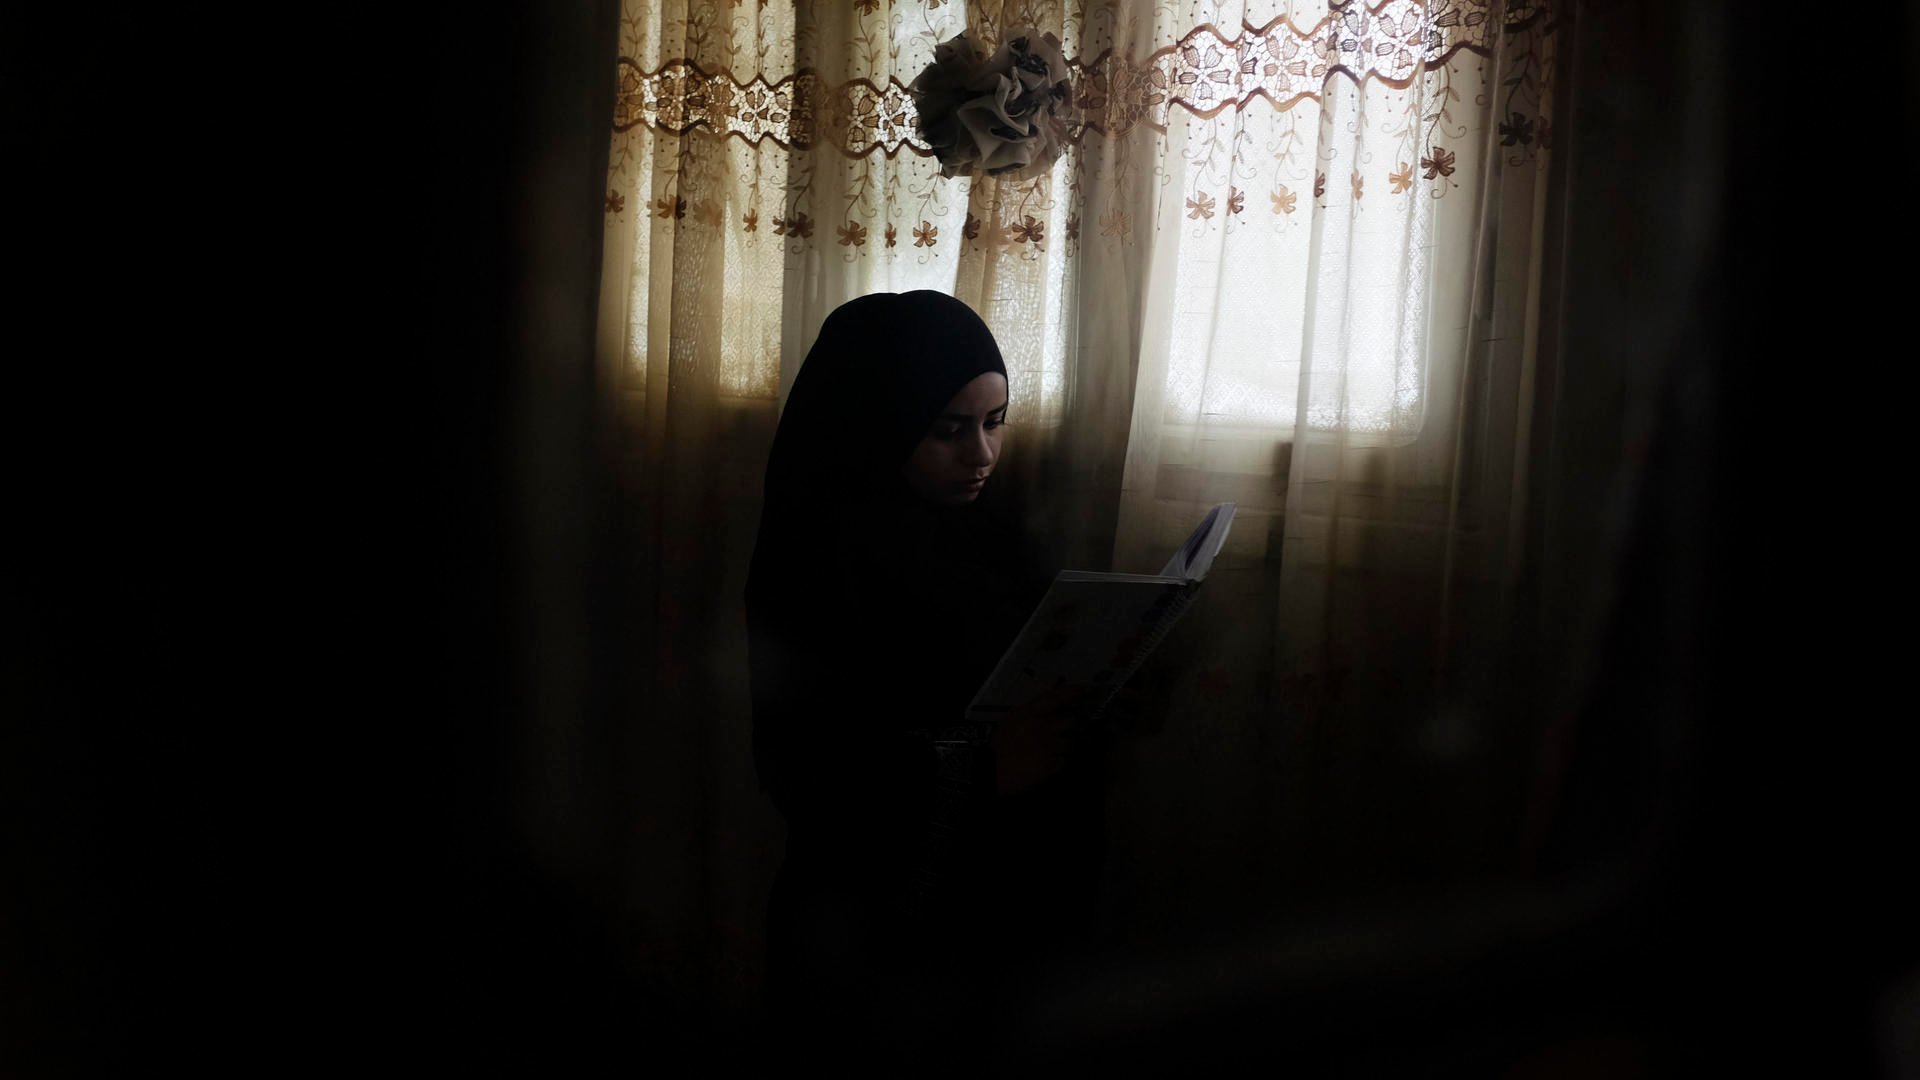 Rawan sits by a window, reading